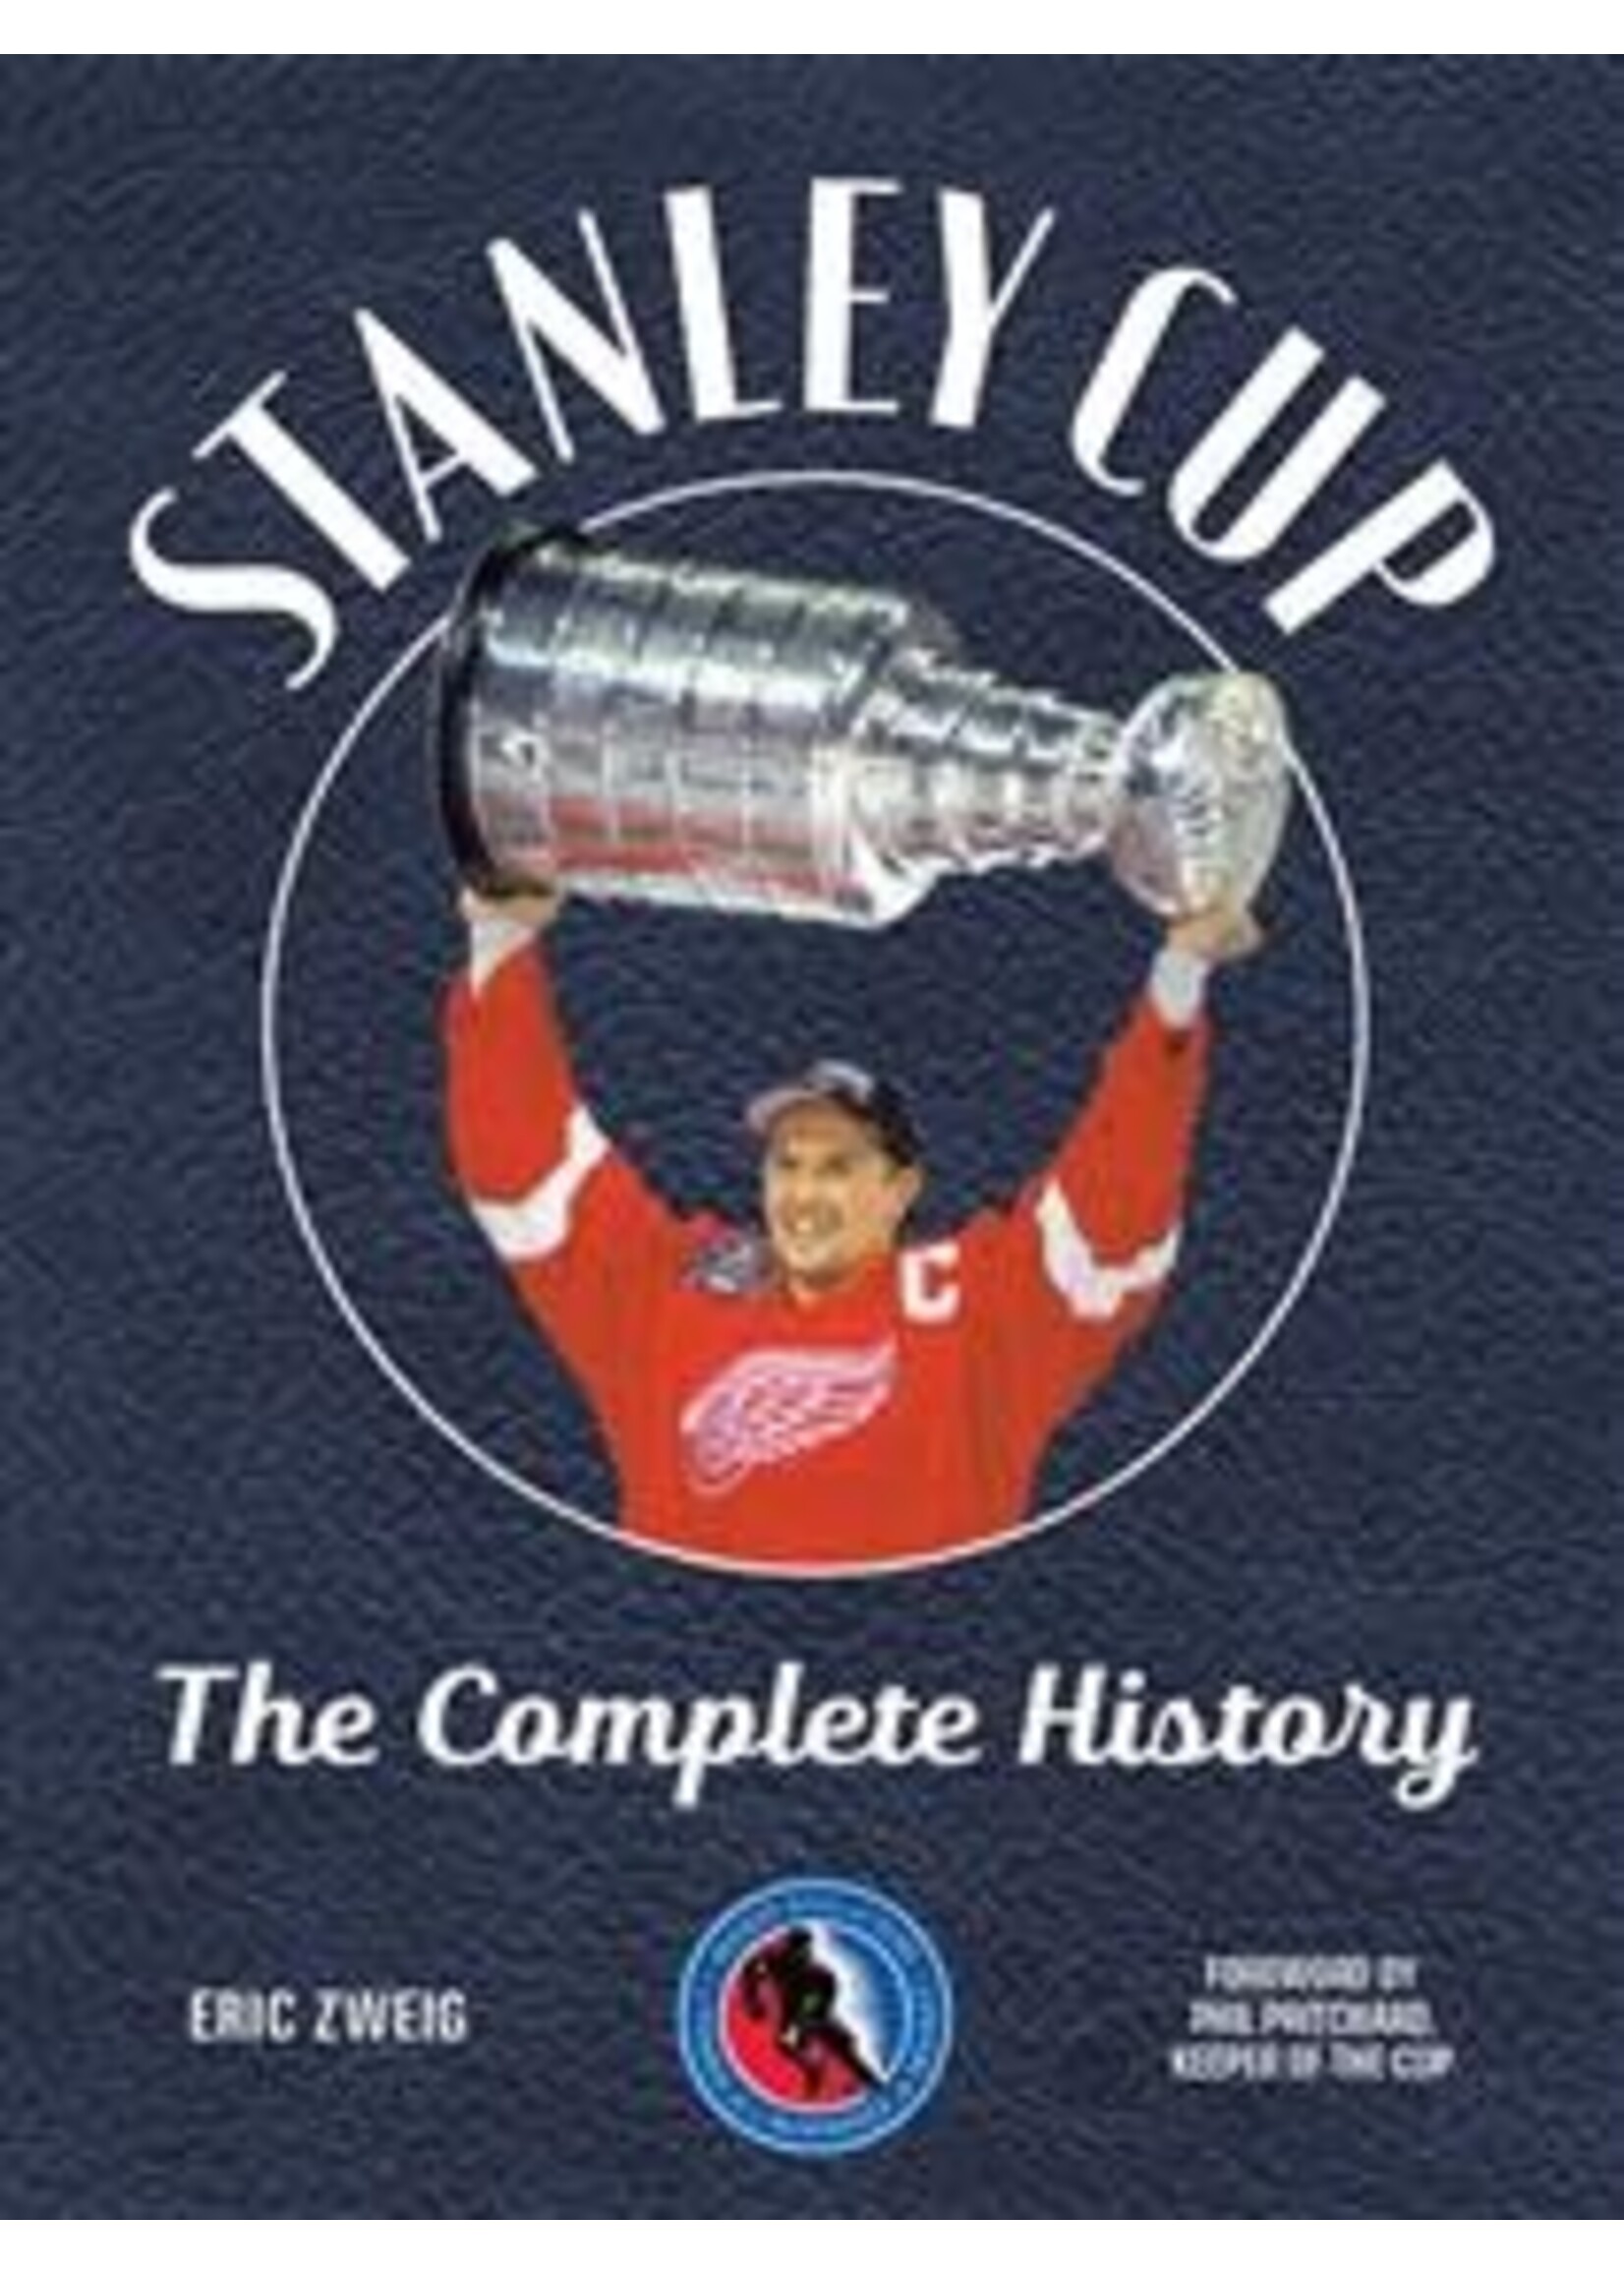 Stanley Cup: The Complete History Second Ed. by Eric Zweig